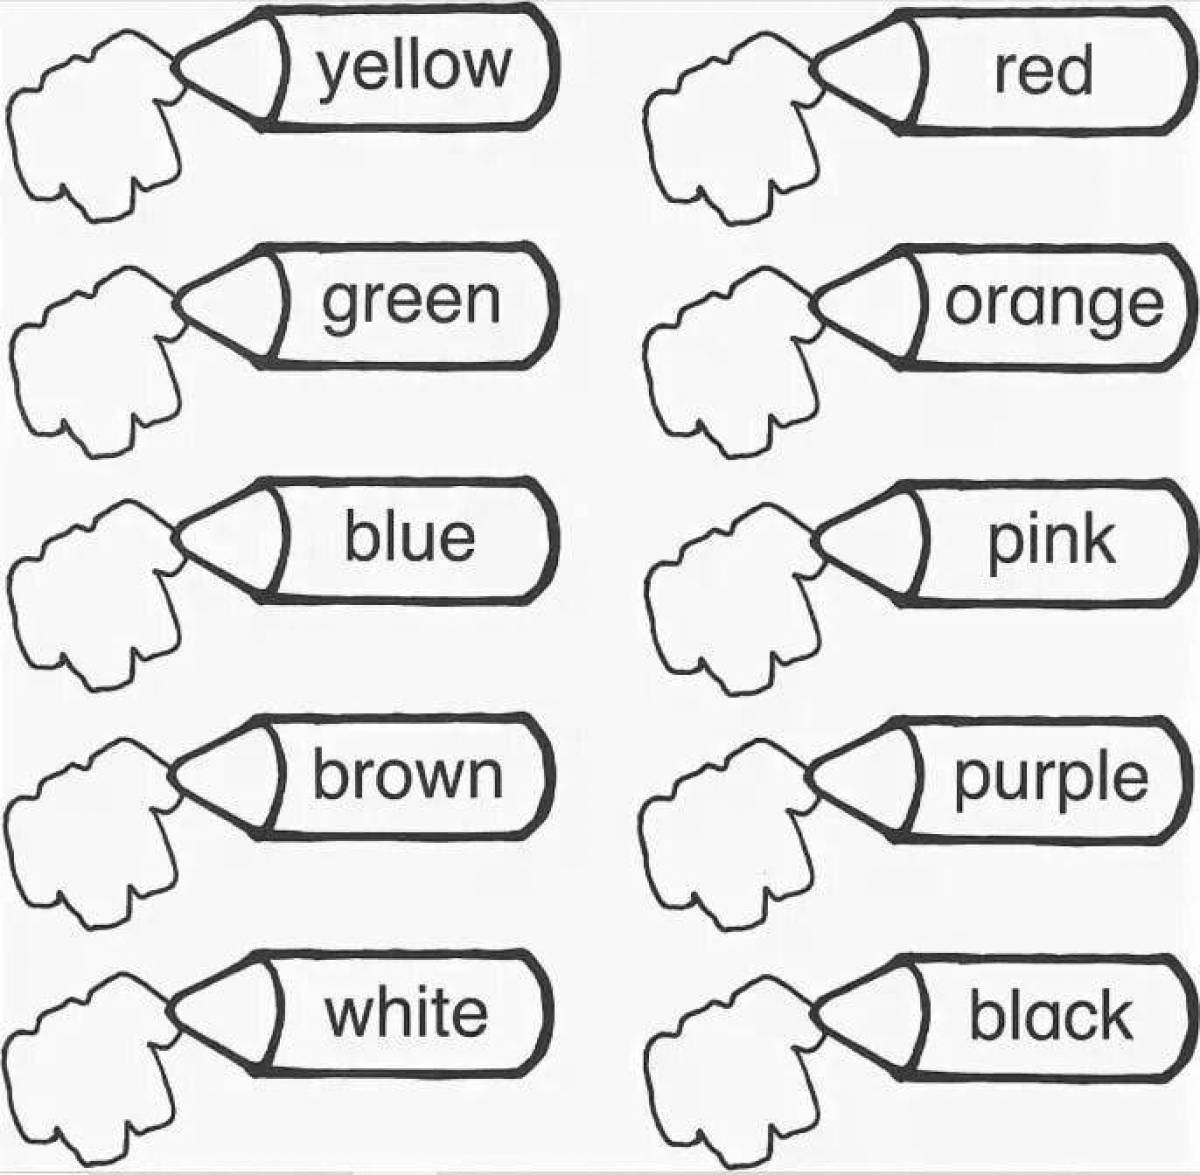 Colorful coloring page translation